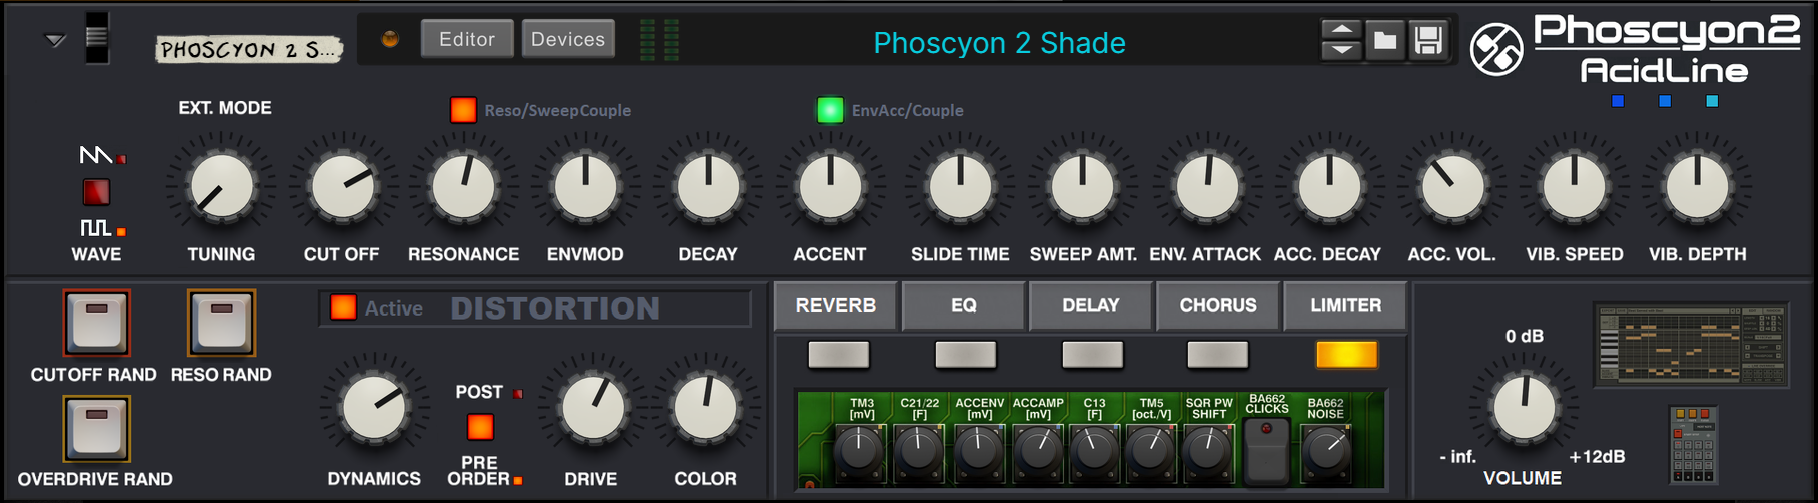 Phoscyon 2 SHADE with knobs and switches.png